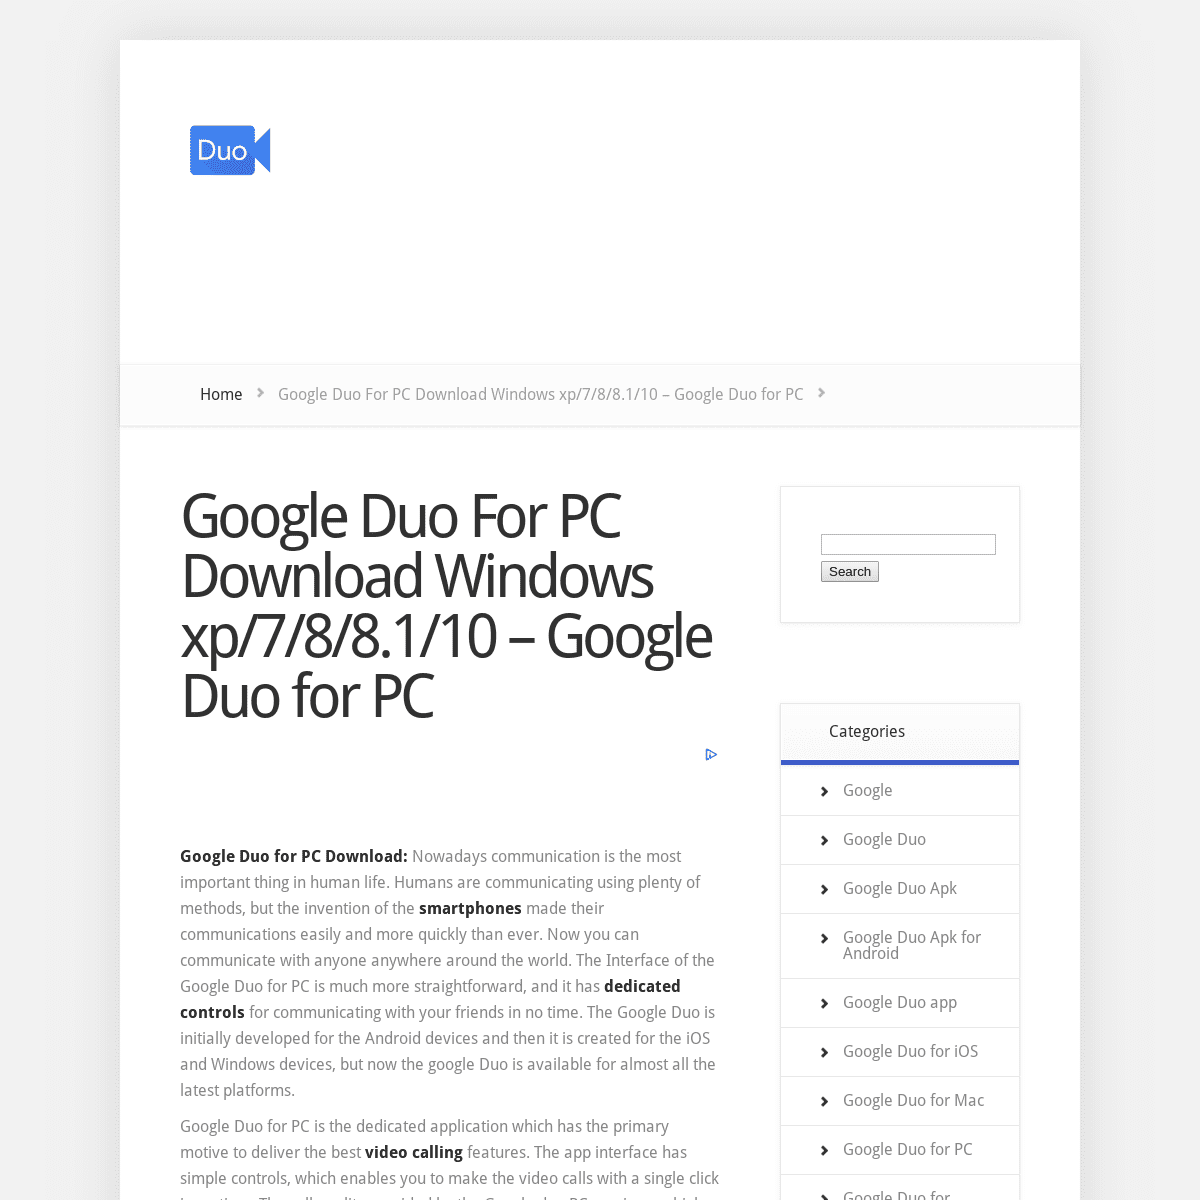 A complete backup of duoforpc.com